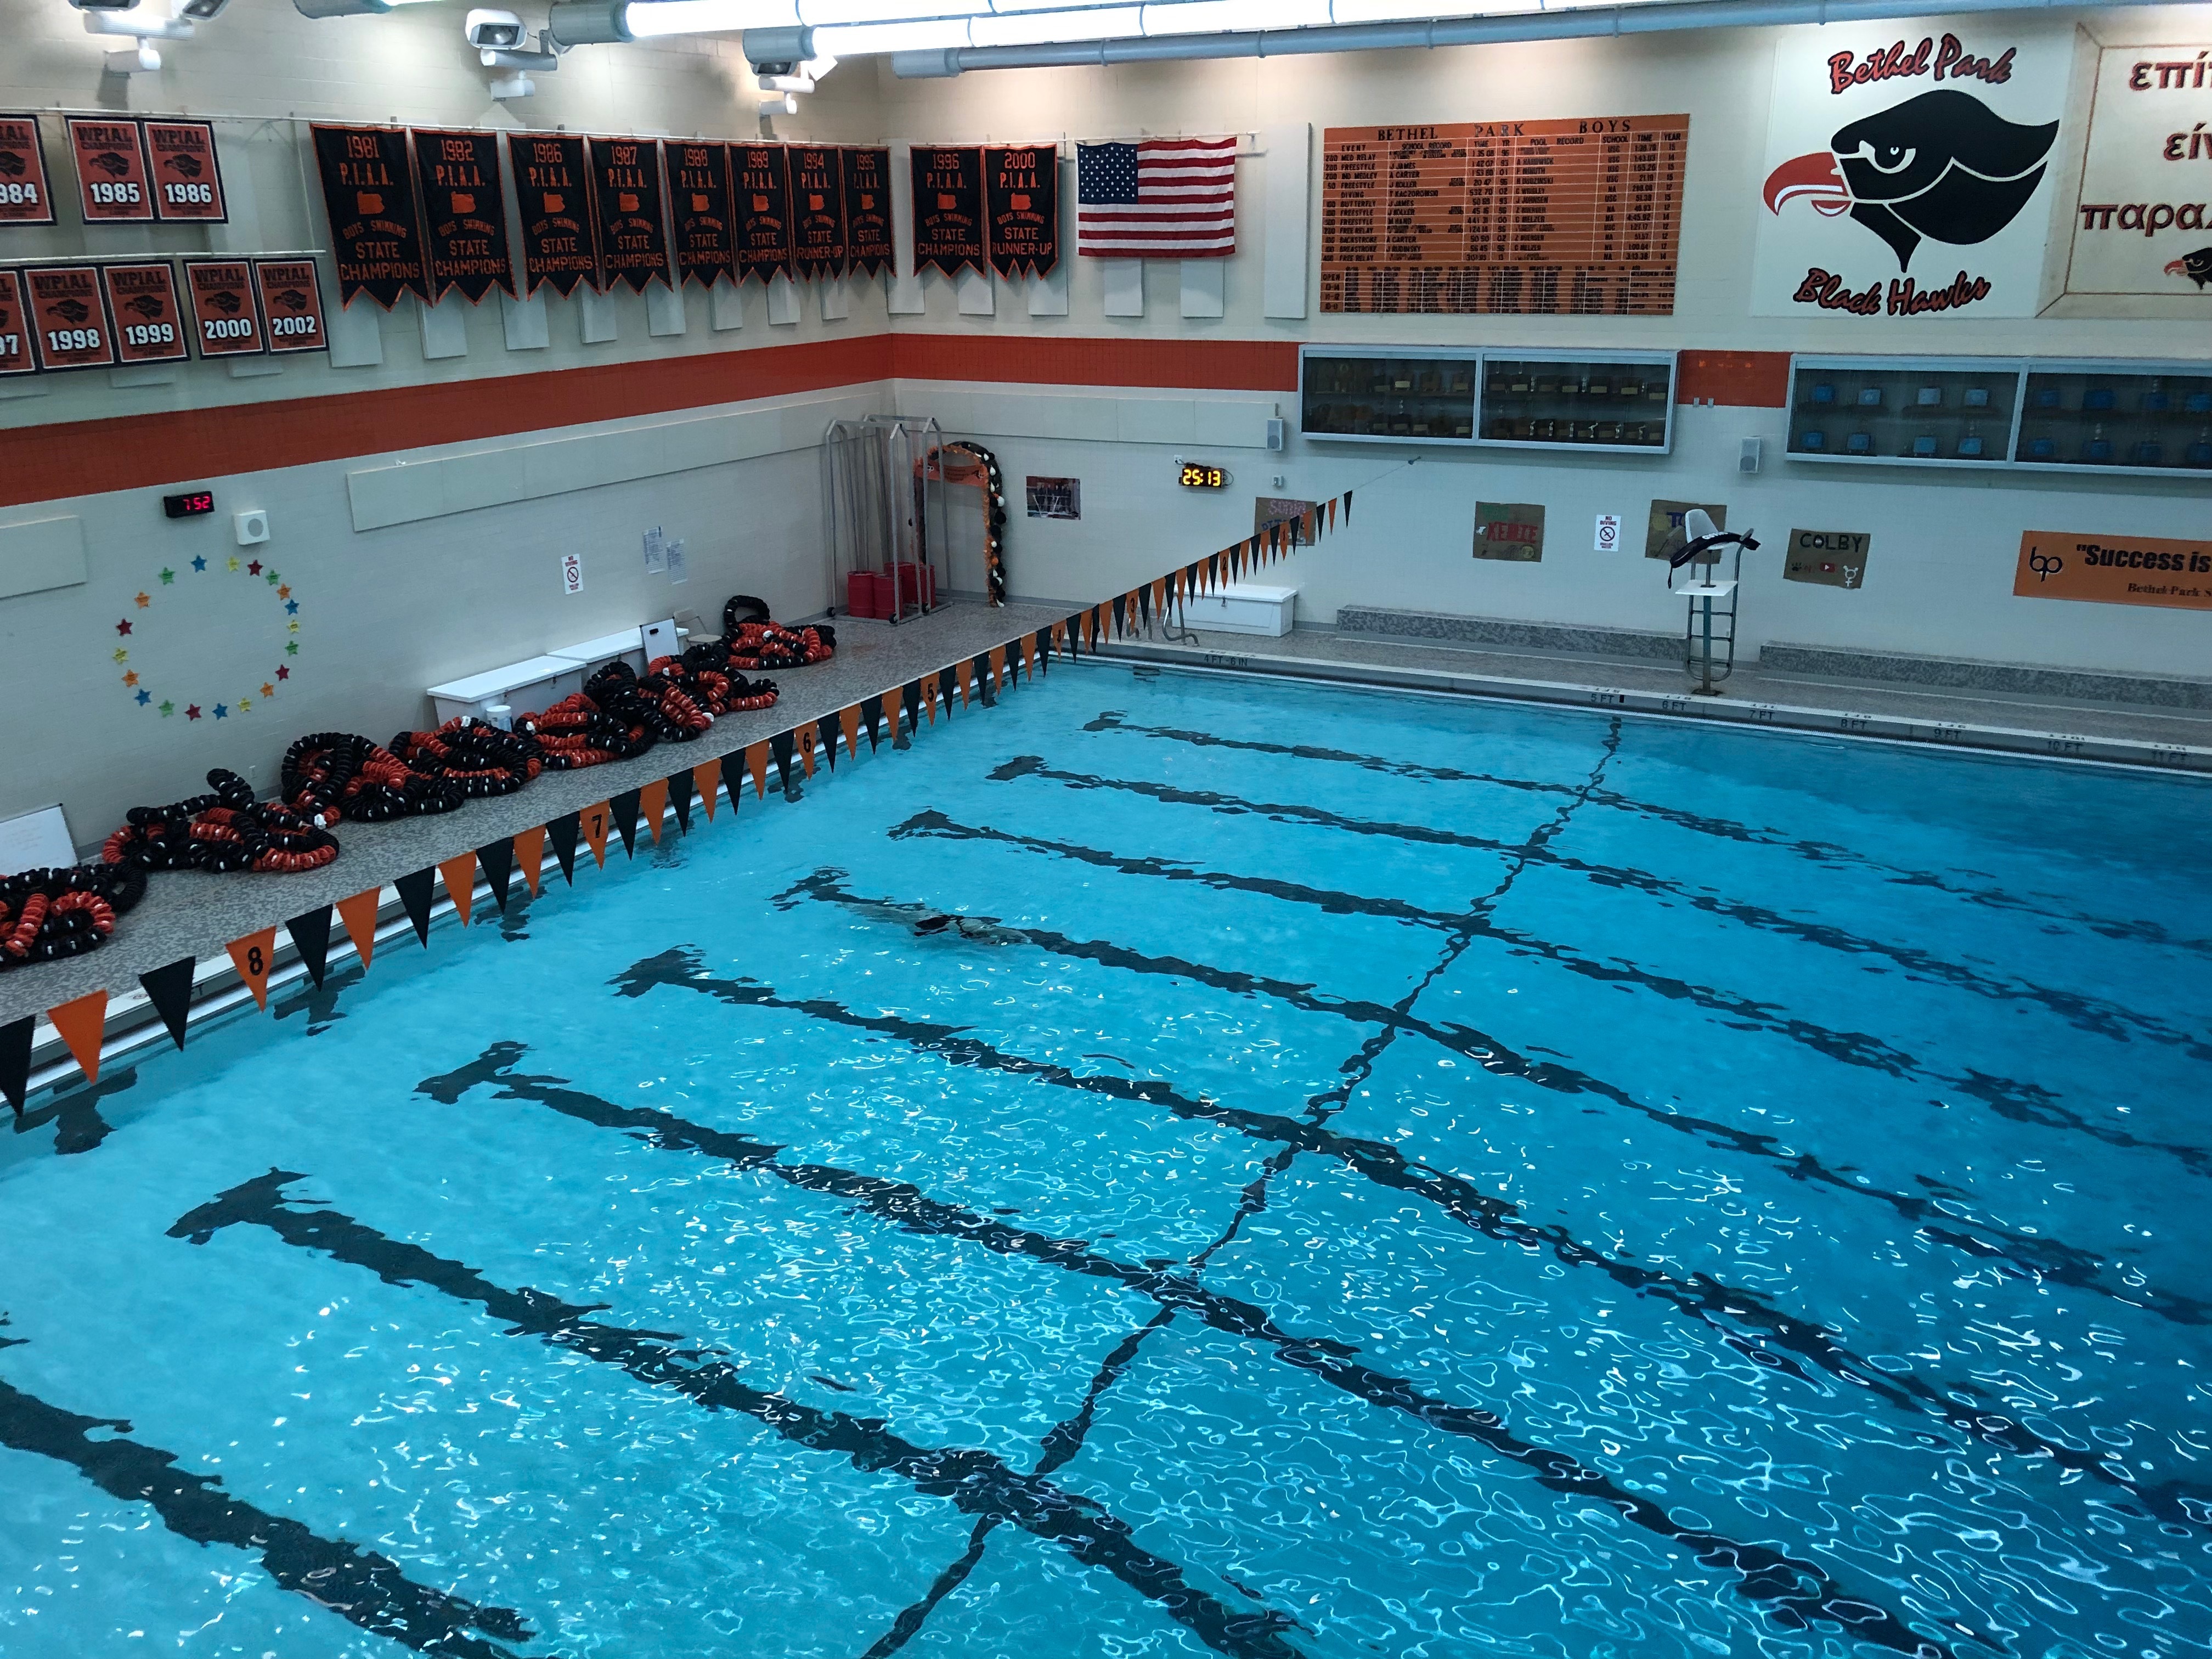 8 lane pool viewed from balcony at BP high school